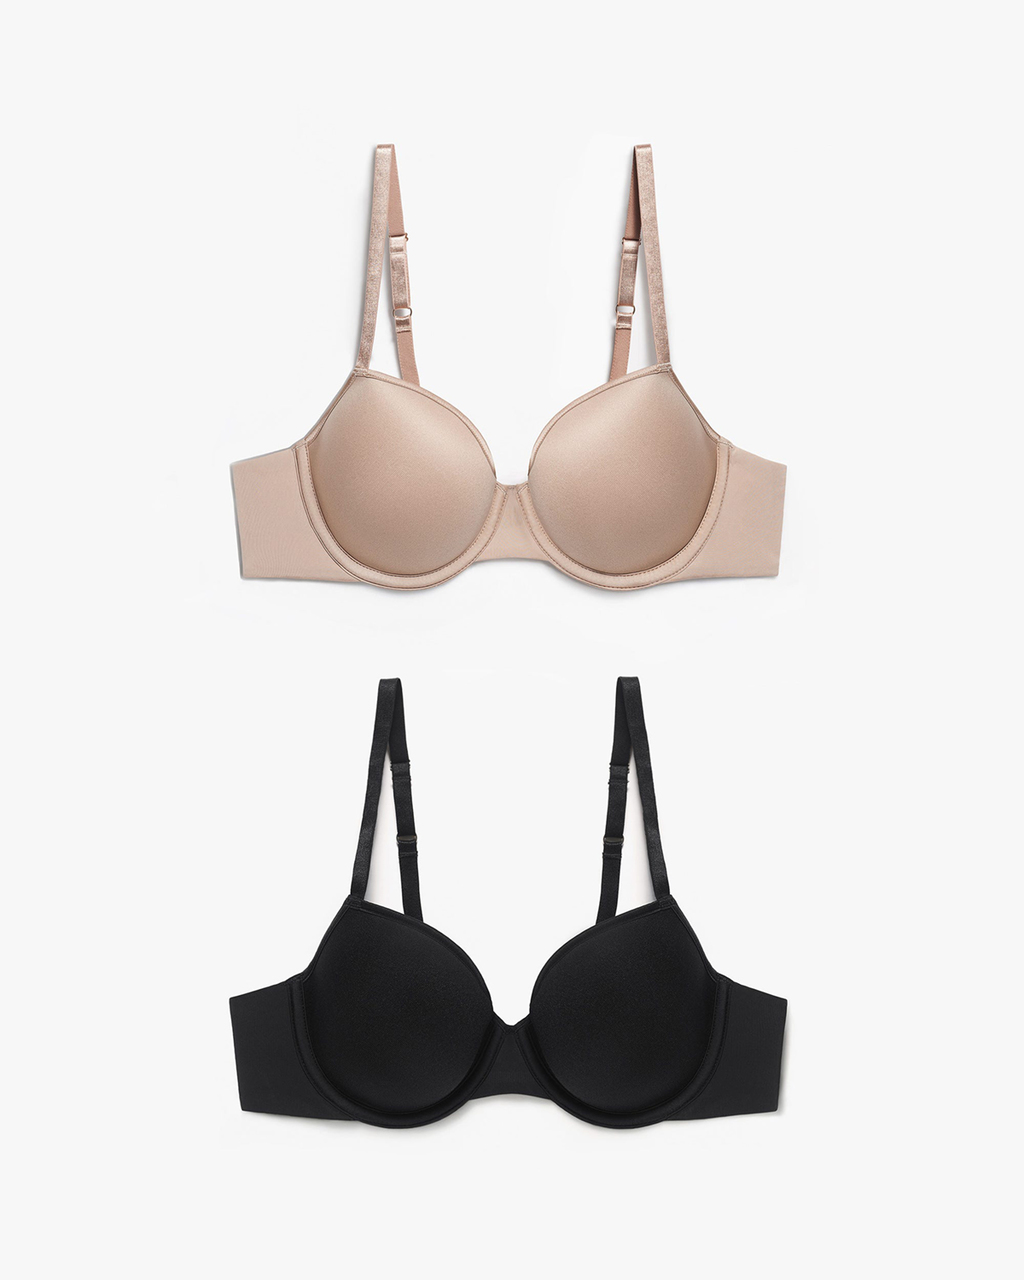 13 Of The Best Intimates To Gift During The Holidays